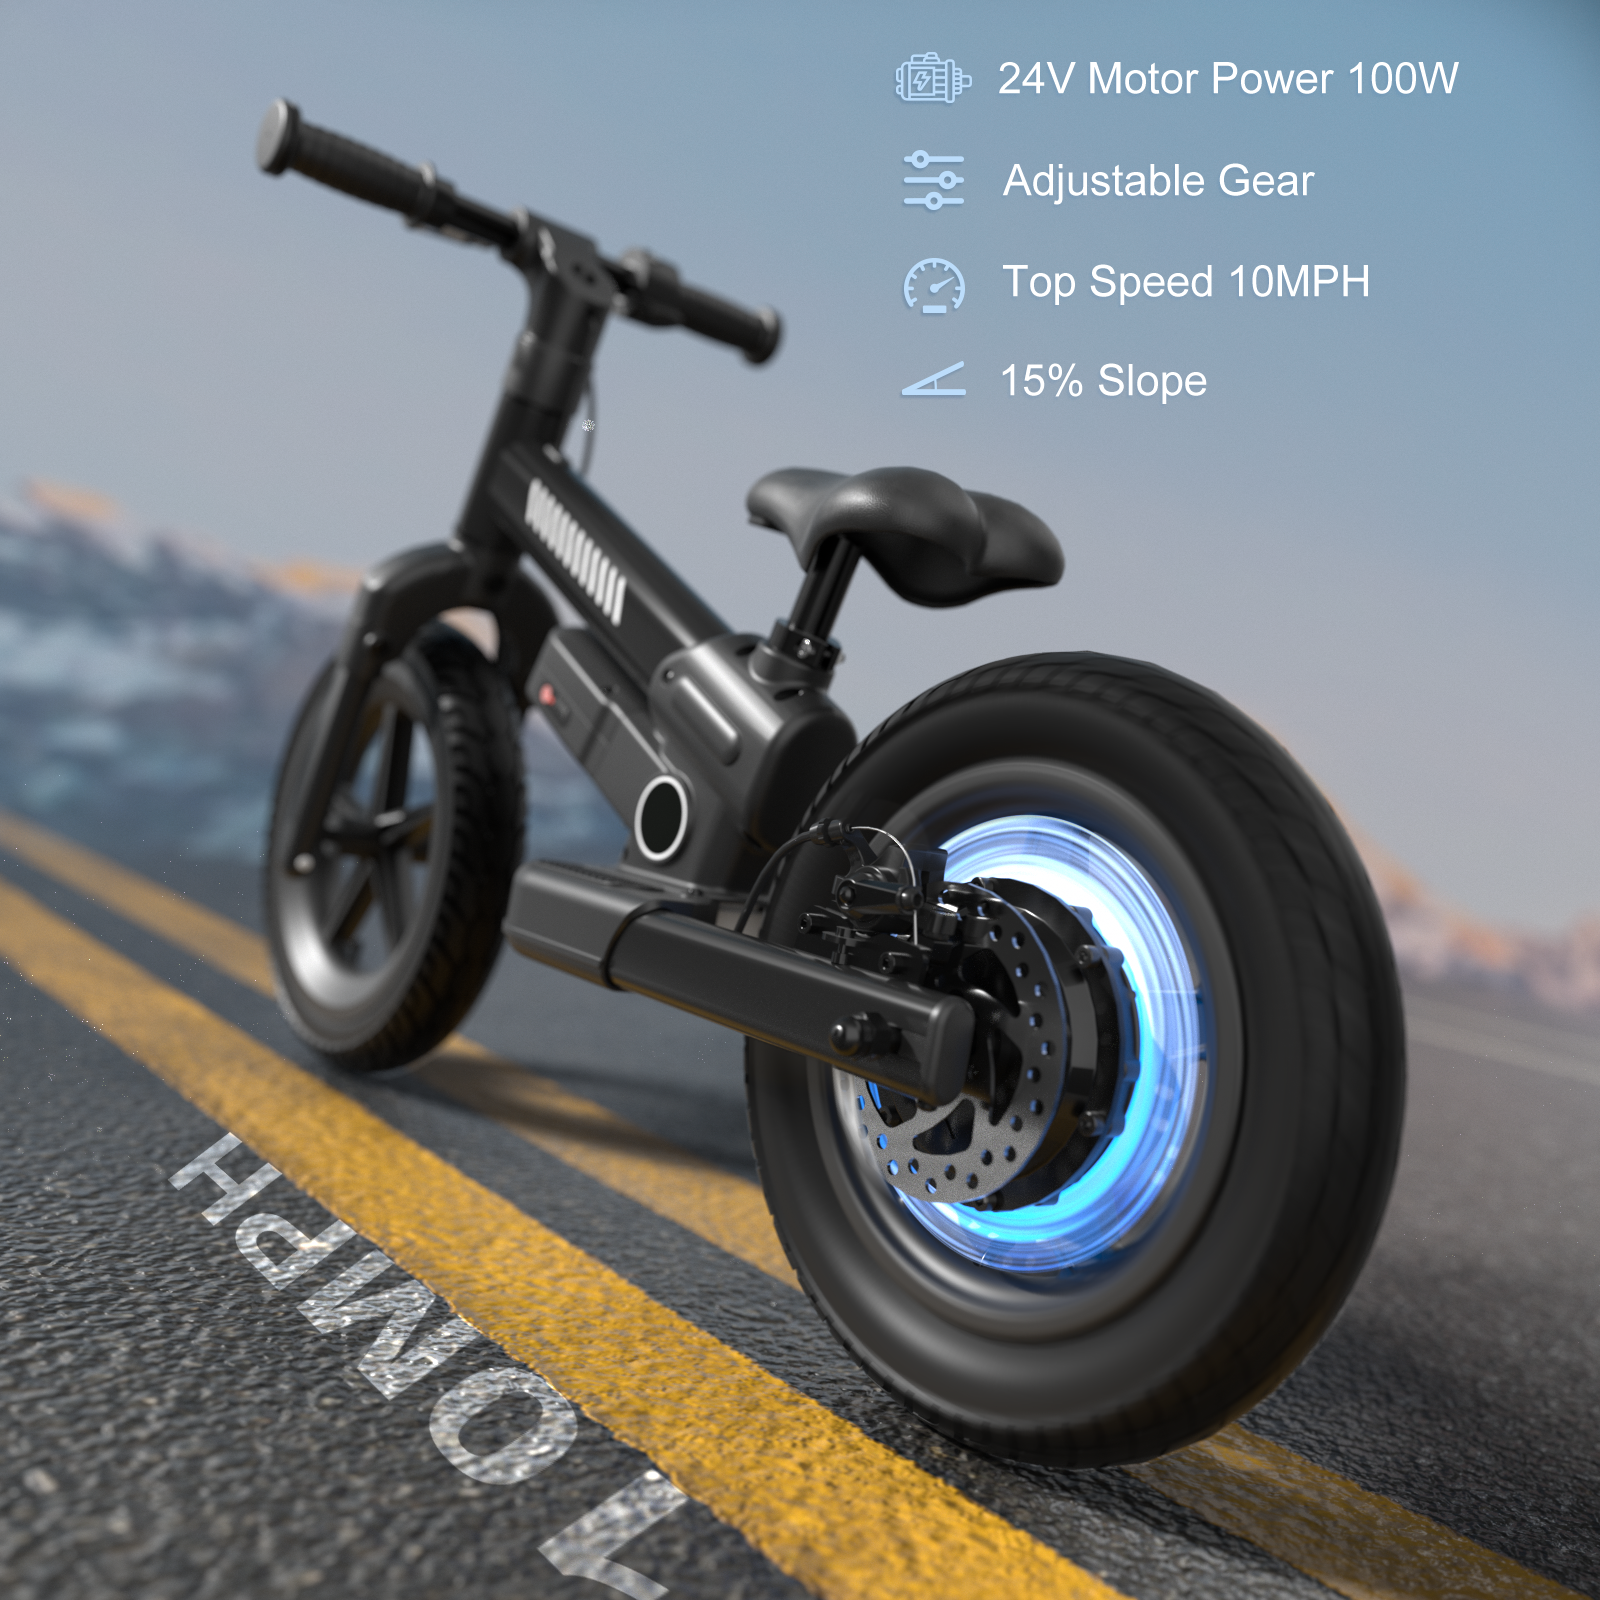 Introducing the XJD 24V 150W Kids Electric Balance Bike: A Revolution in Kids' Adventure